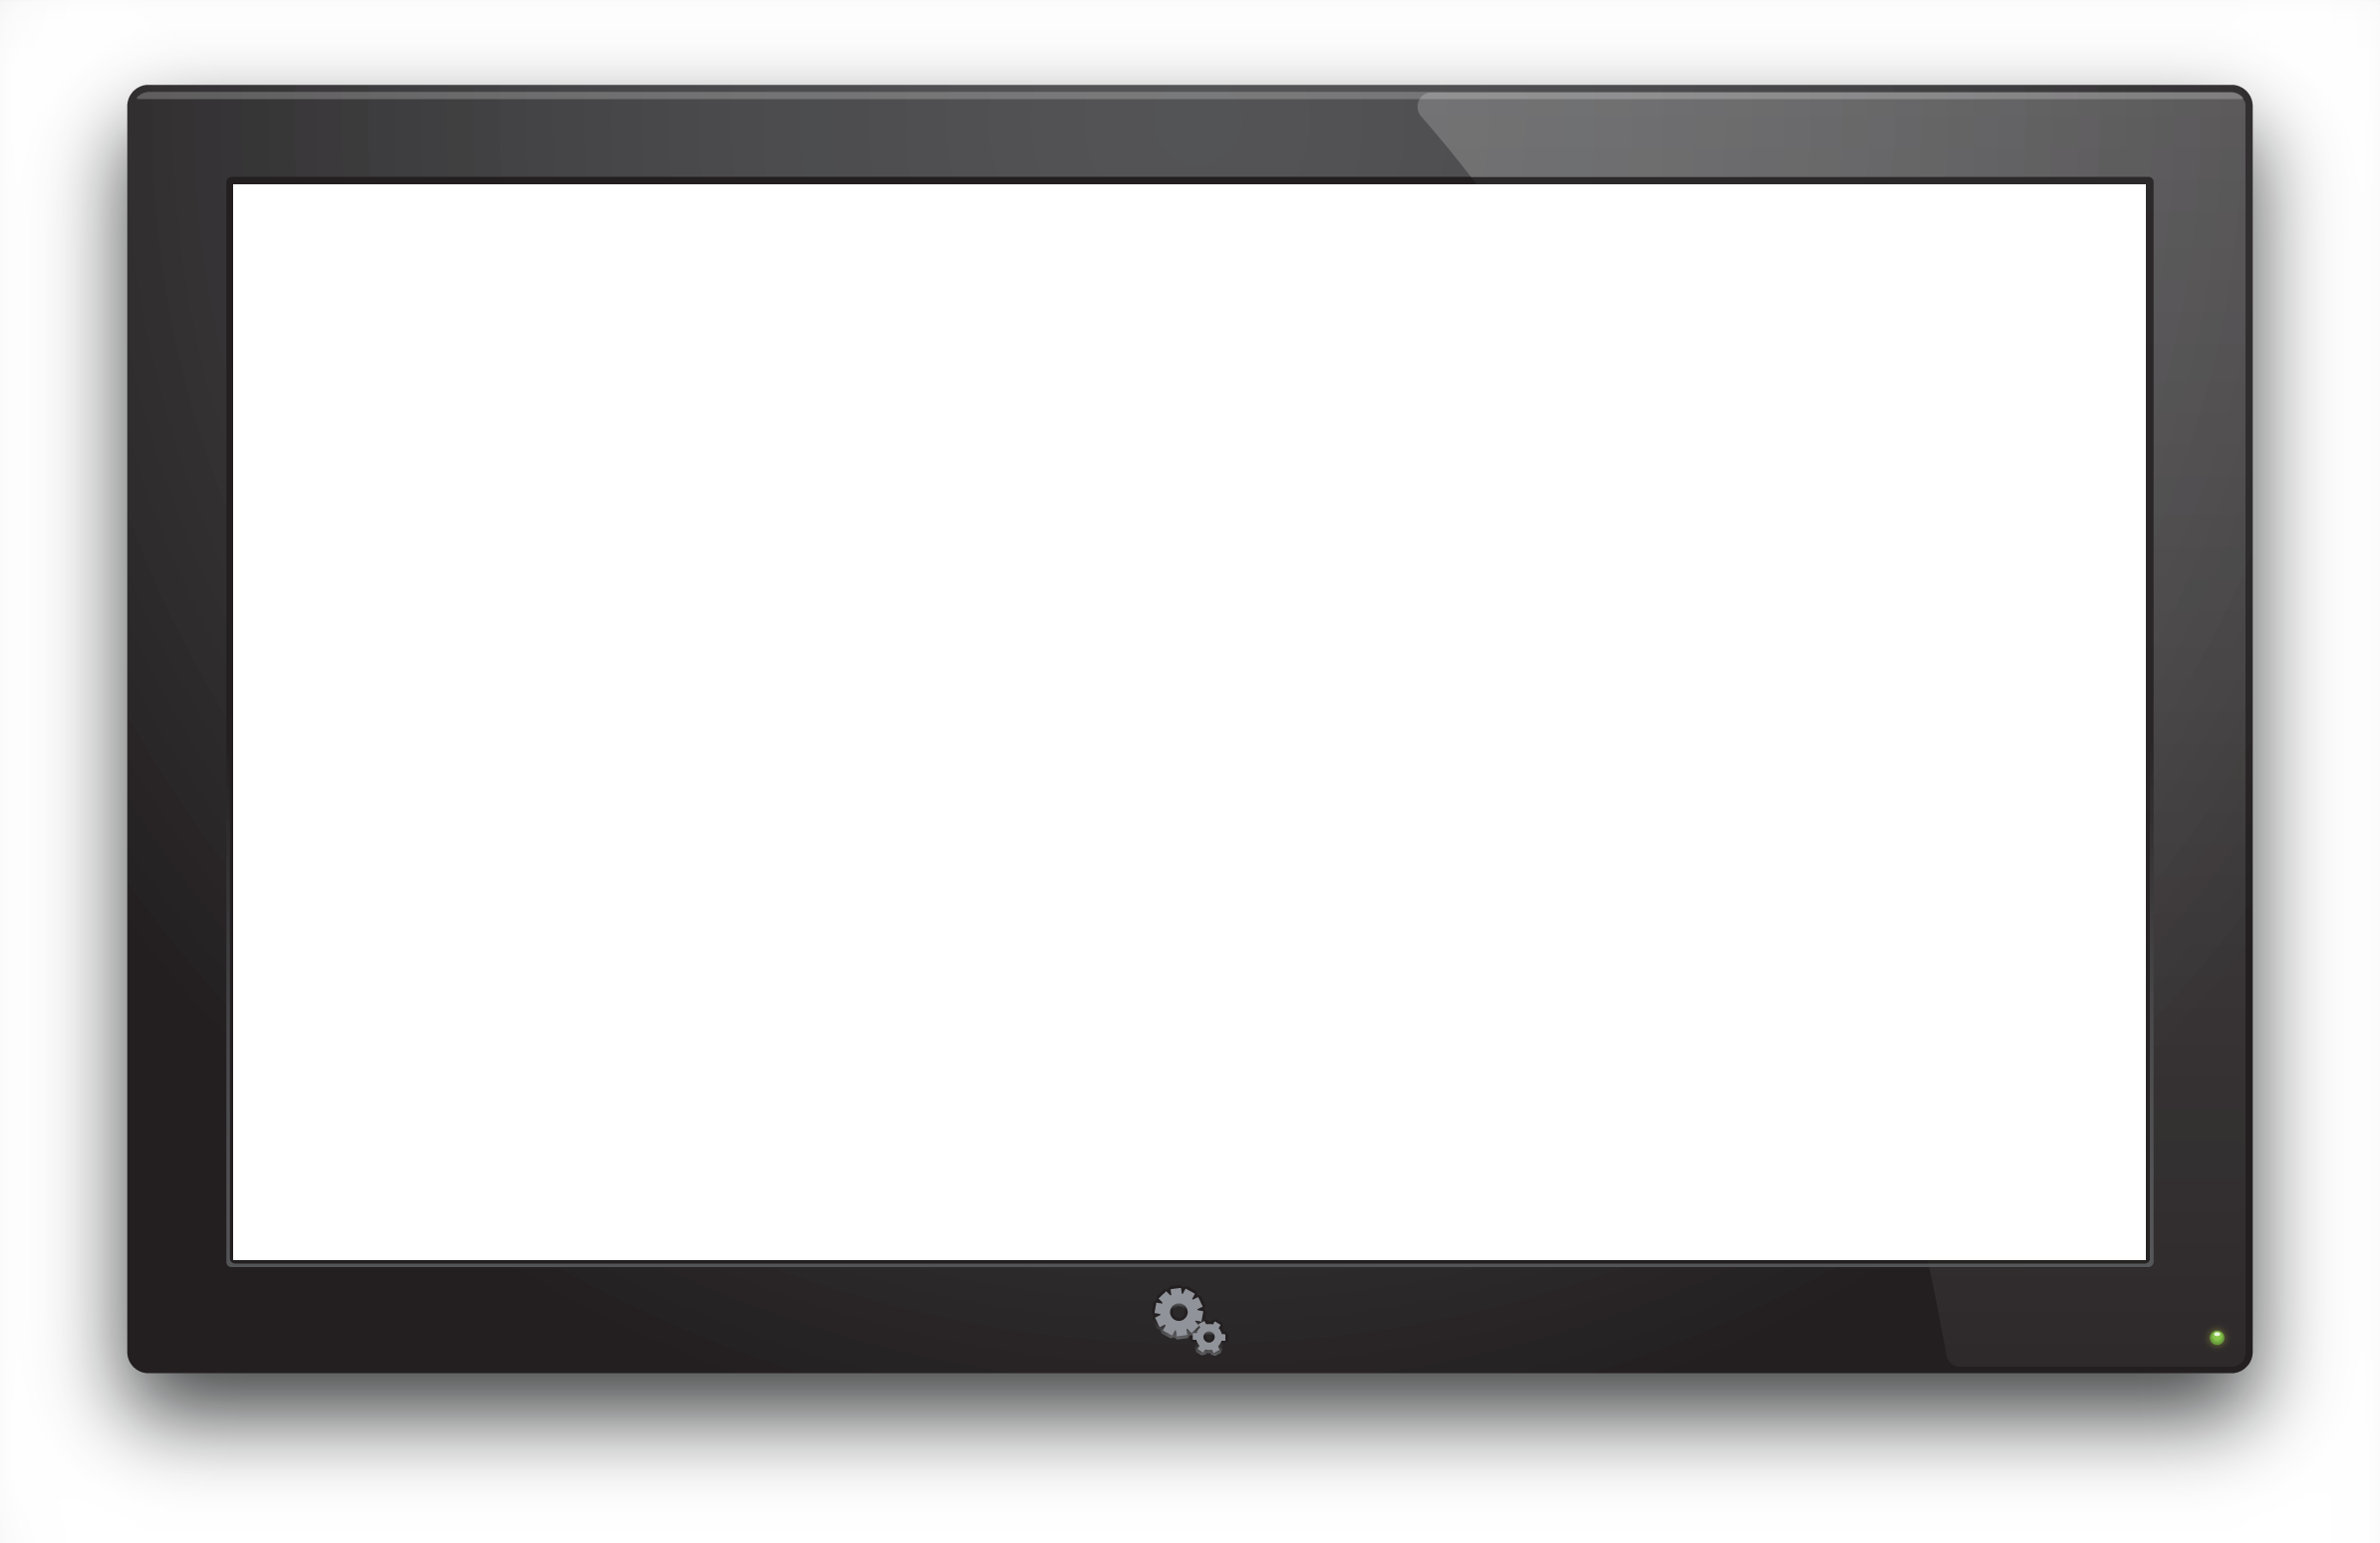 Led Television PNG Image.